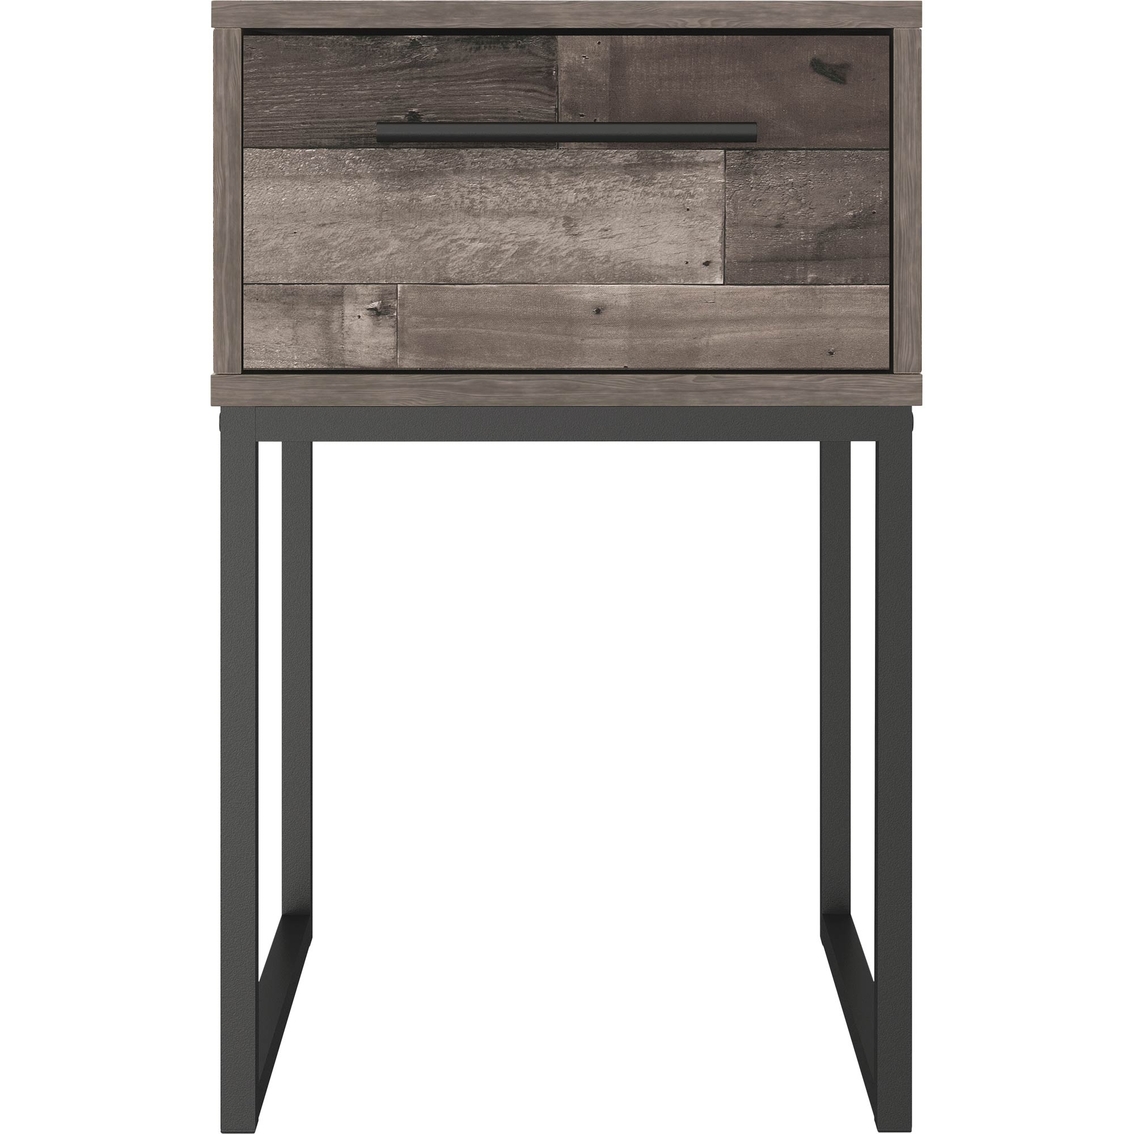 Signature Design by Ashley Ready to Assemble Neilsville Nightstand - Image 2 of 7